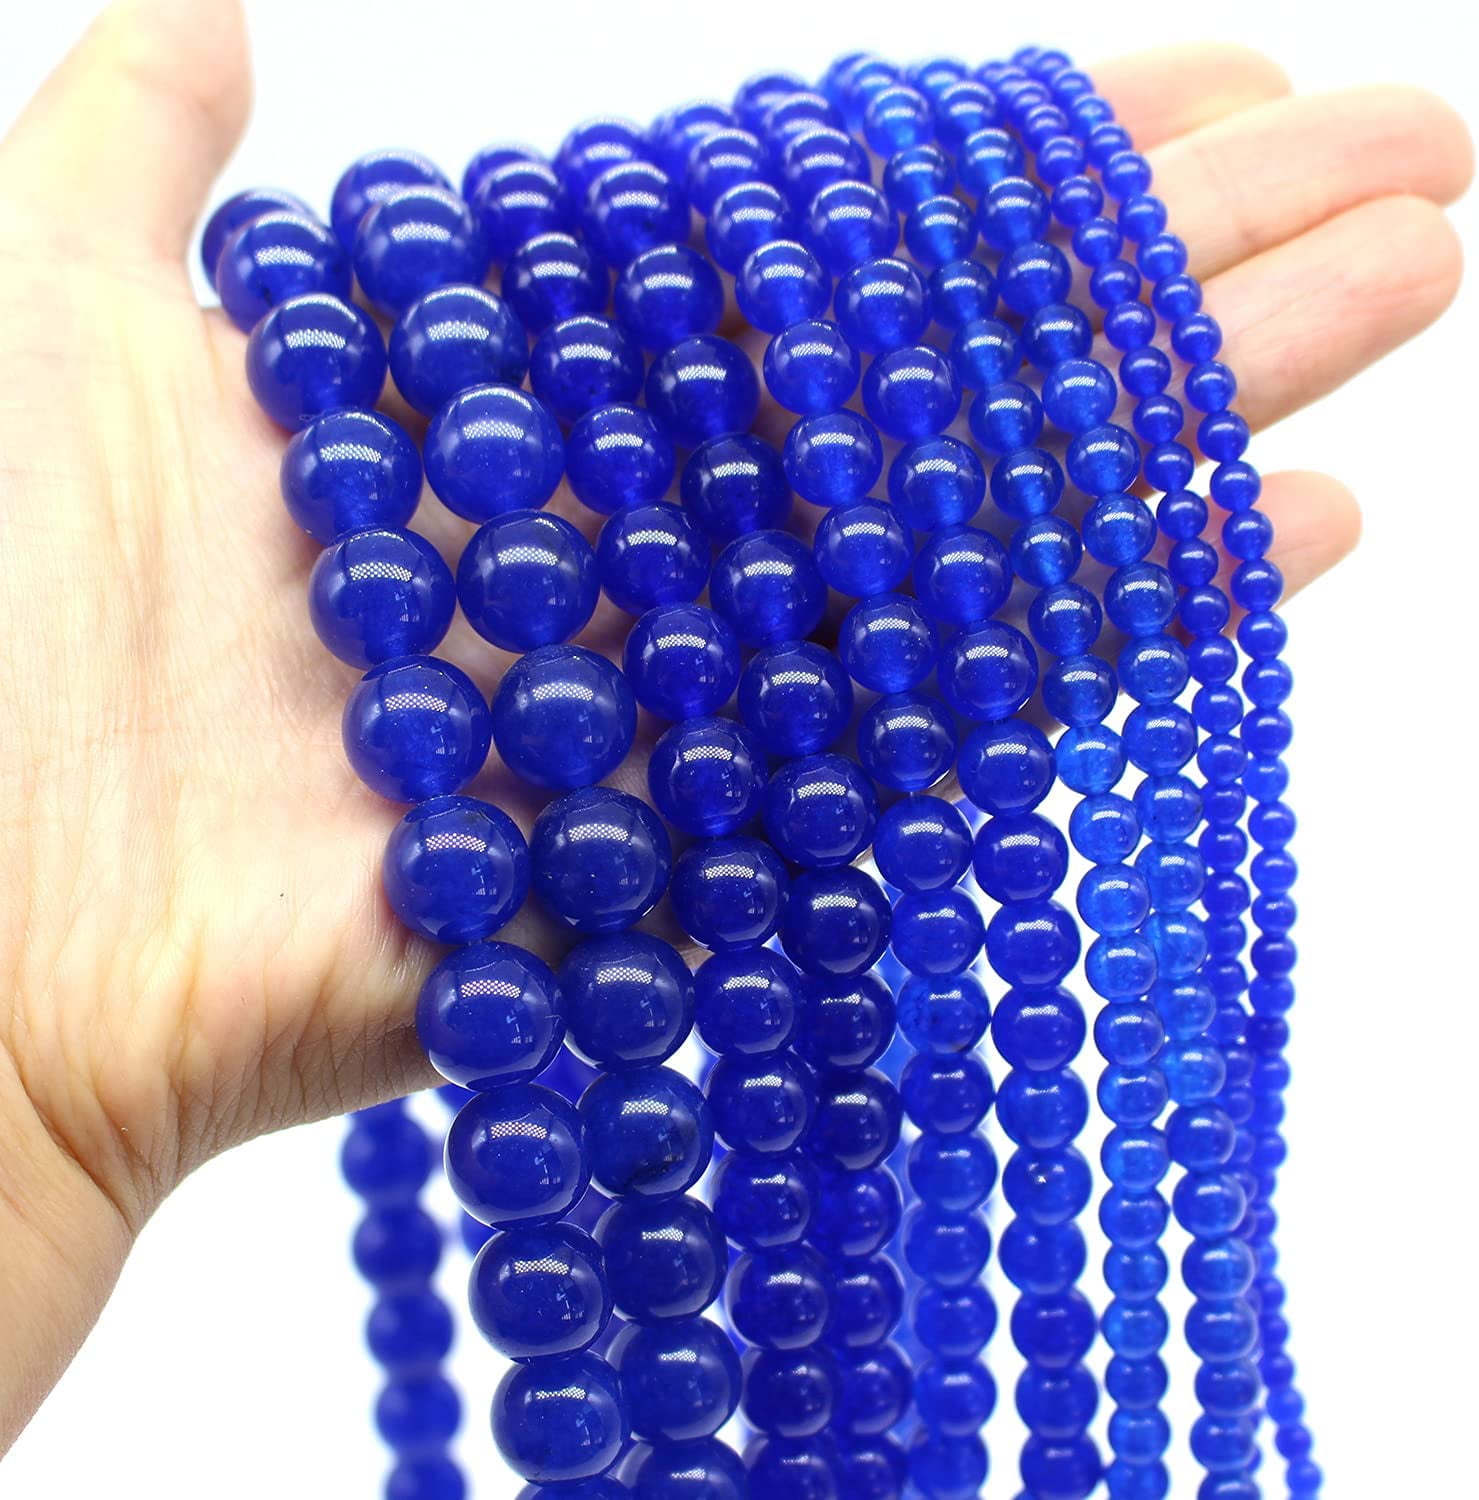 Natural Round Smooth Agate Multi Color Gemstone Beads Jewelry Making Strand 15" 